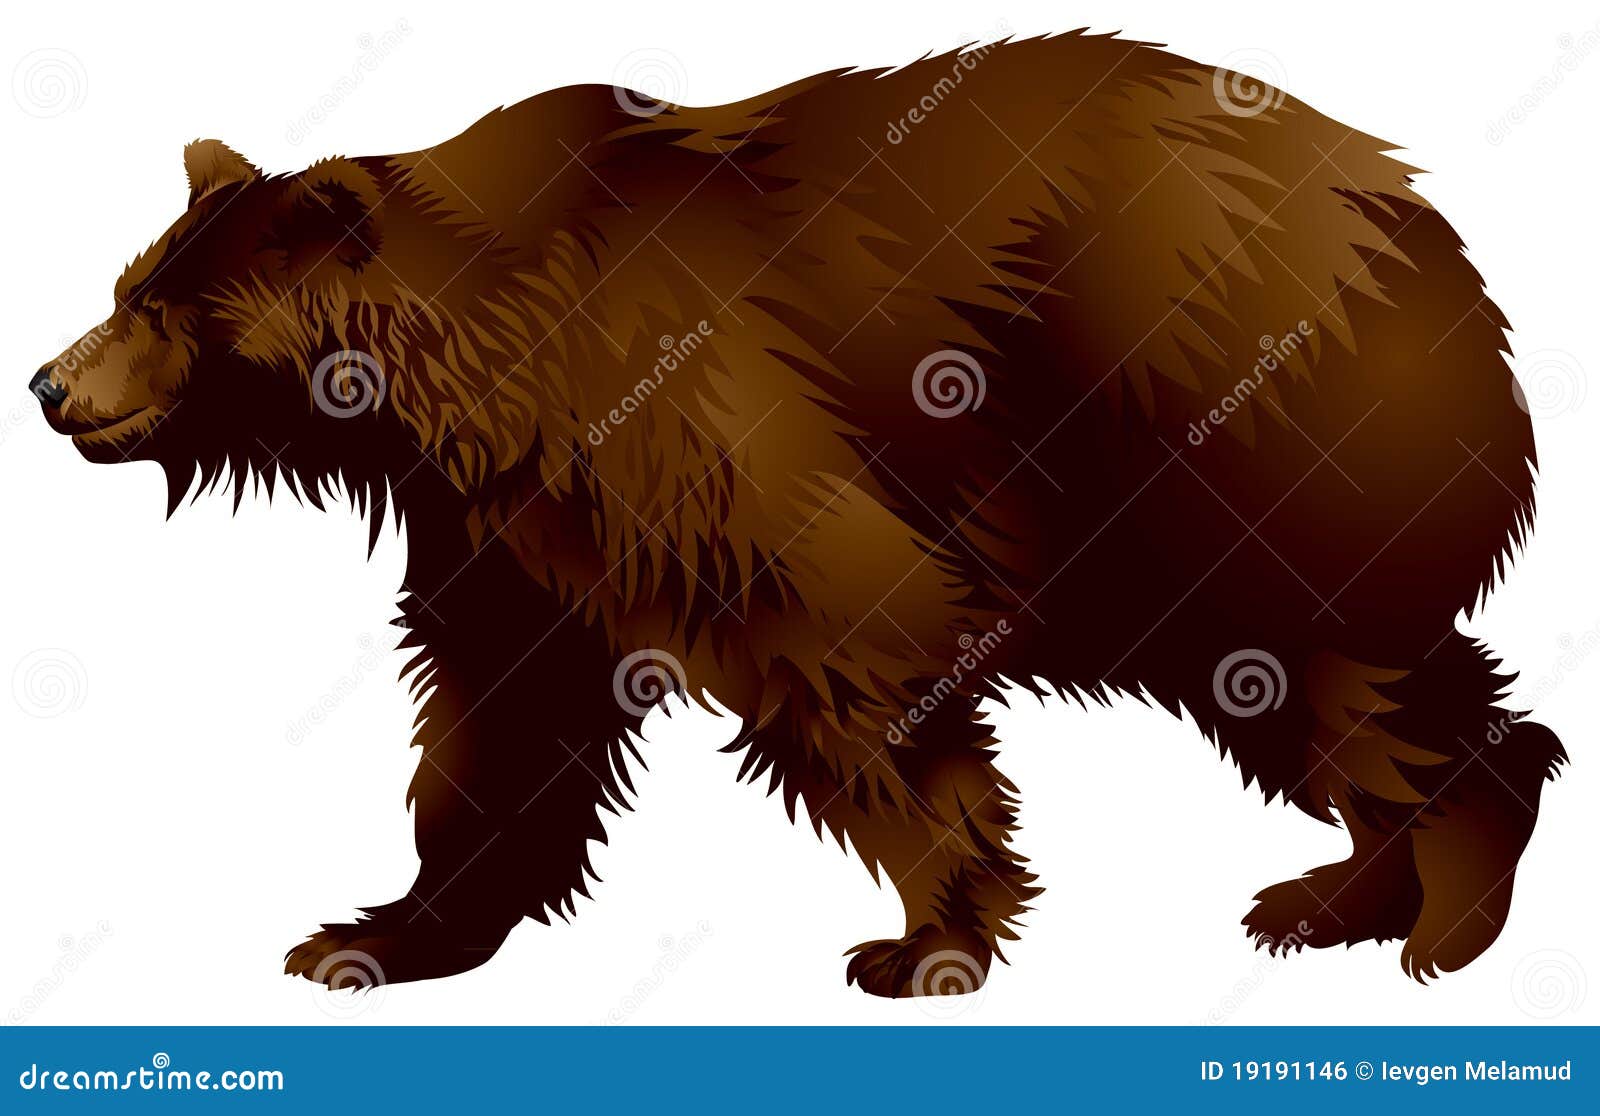 Brown bear stock vector. Illustration of northern, north - 19191146